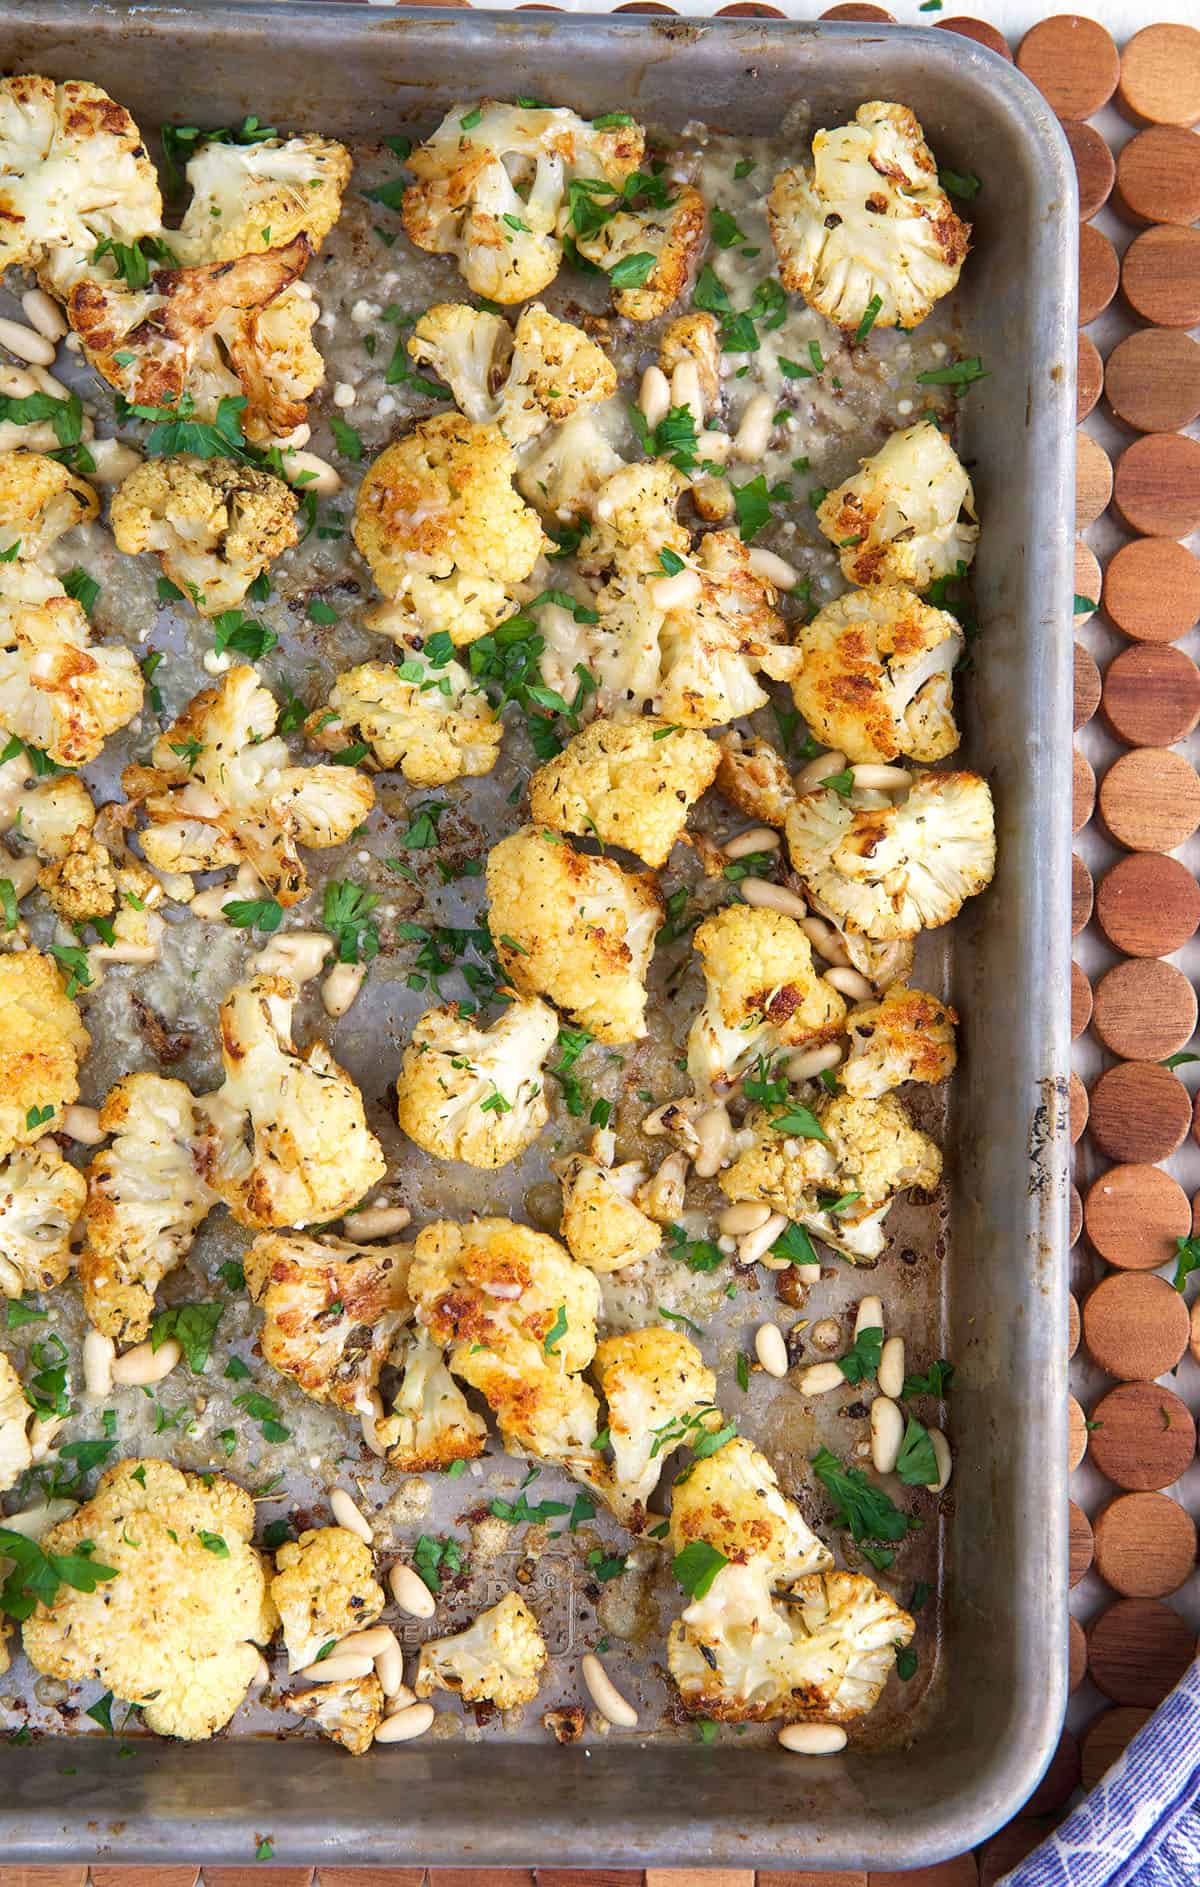 Roasted cauliflower is spread all over a baking sheet. 